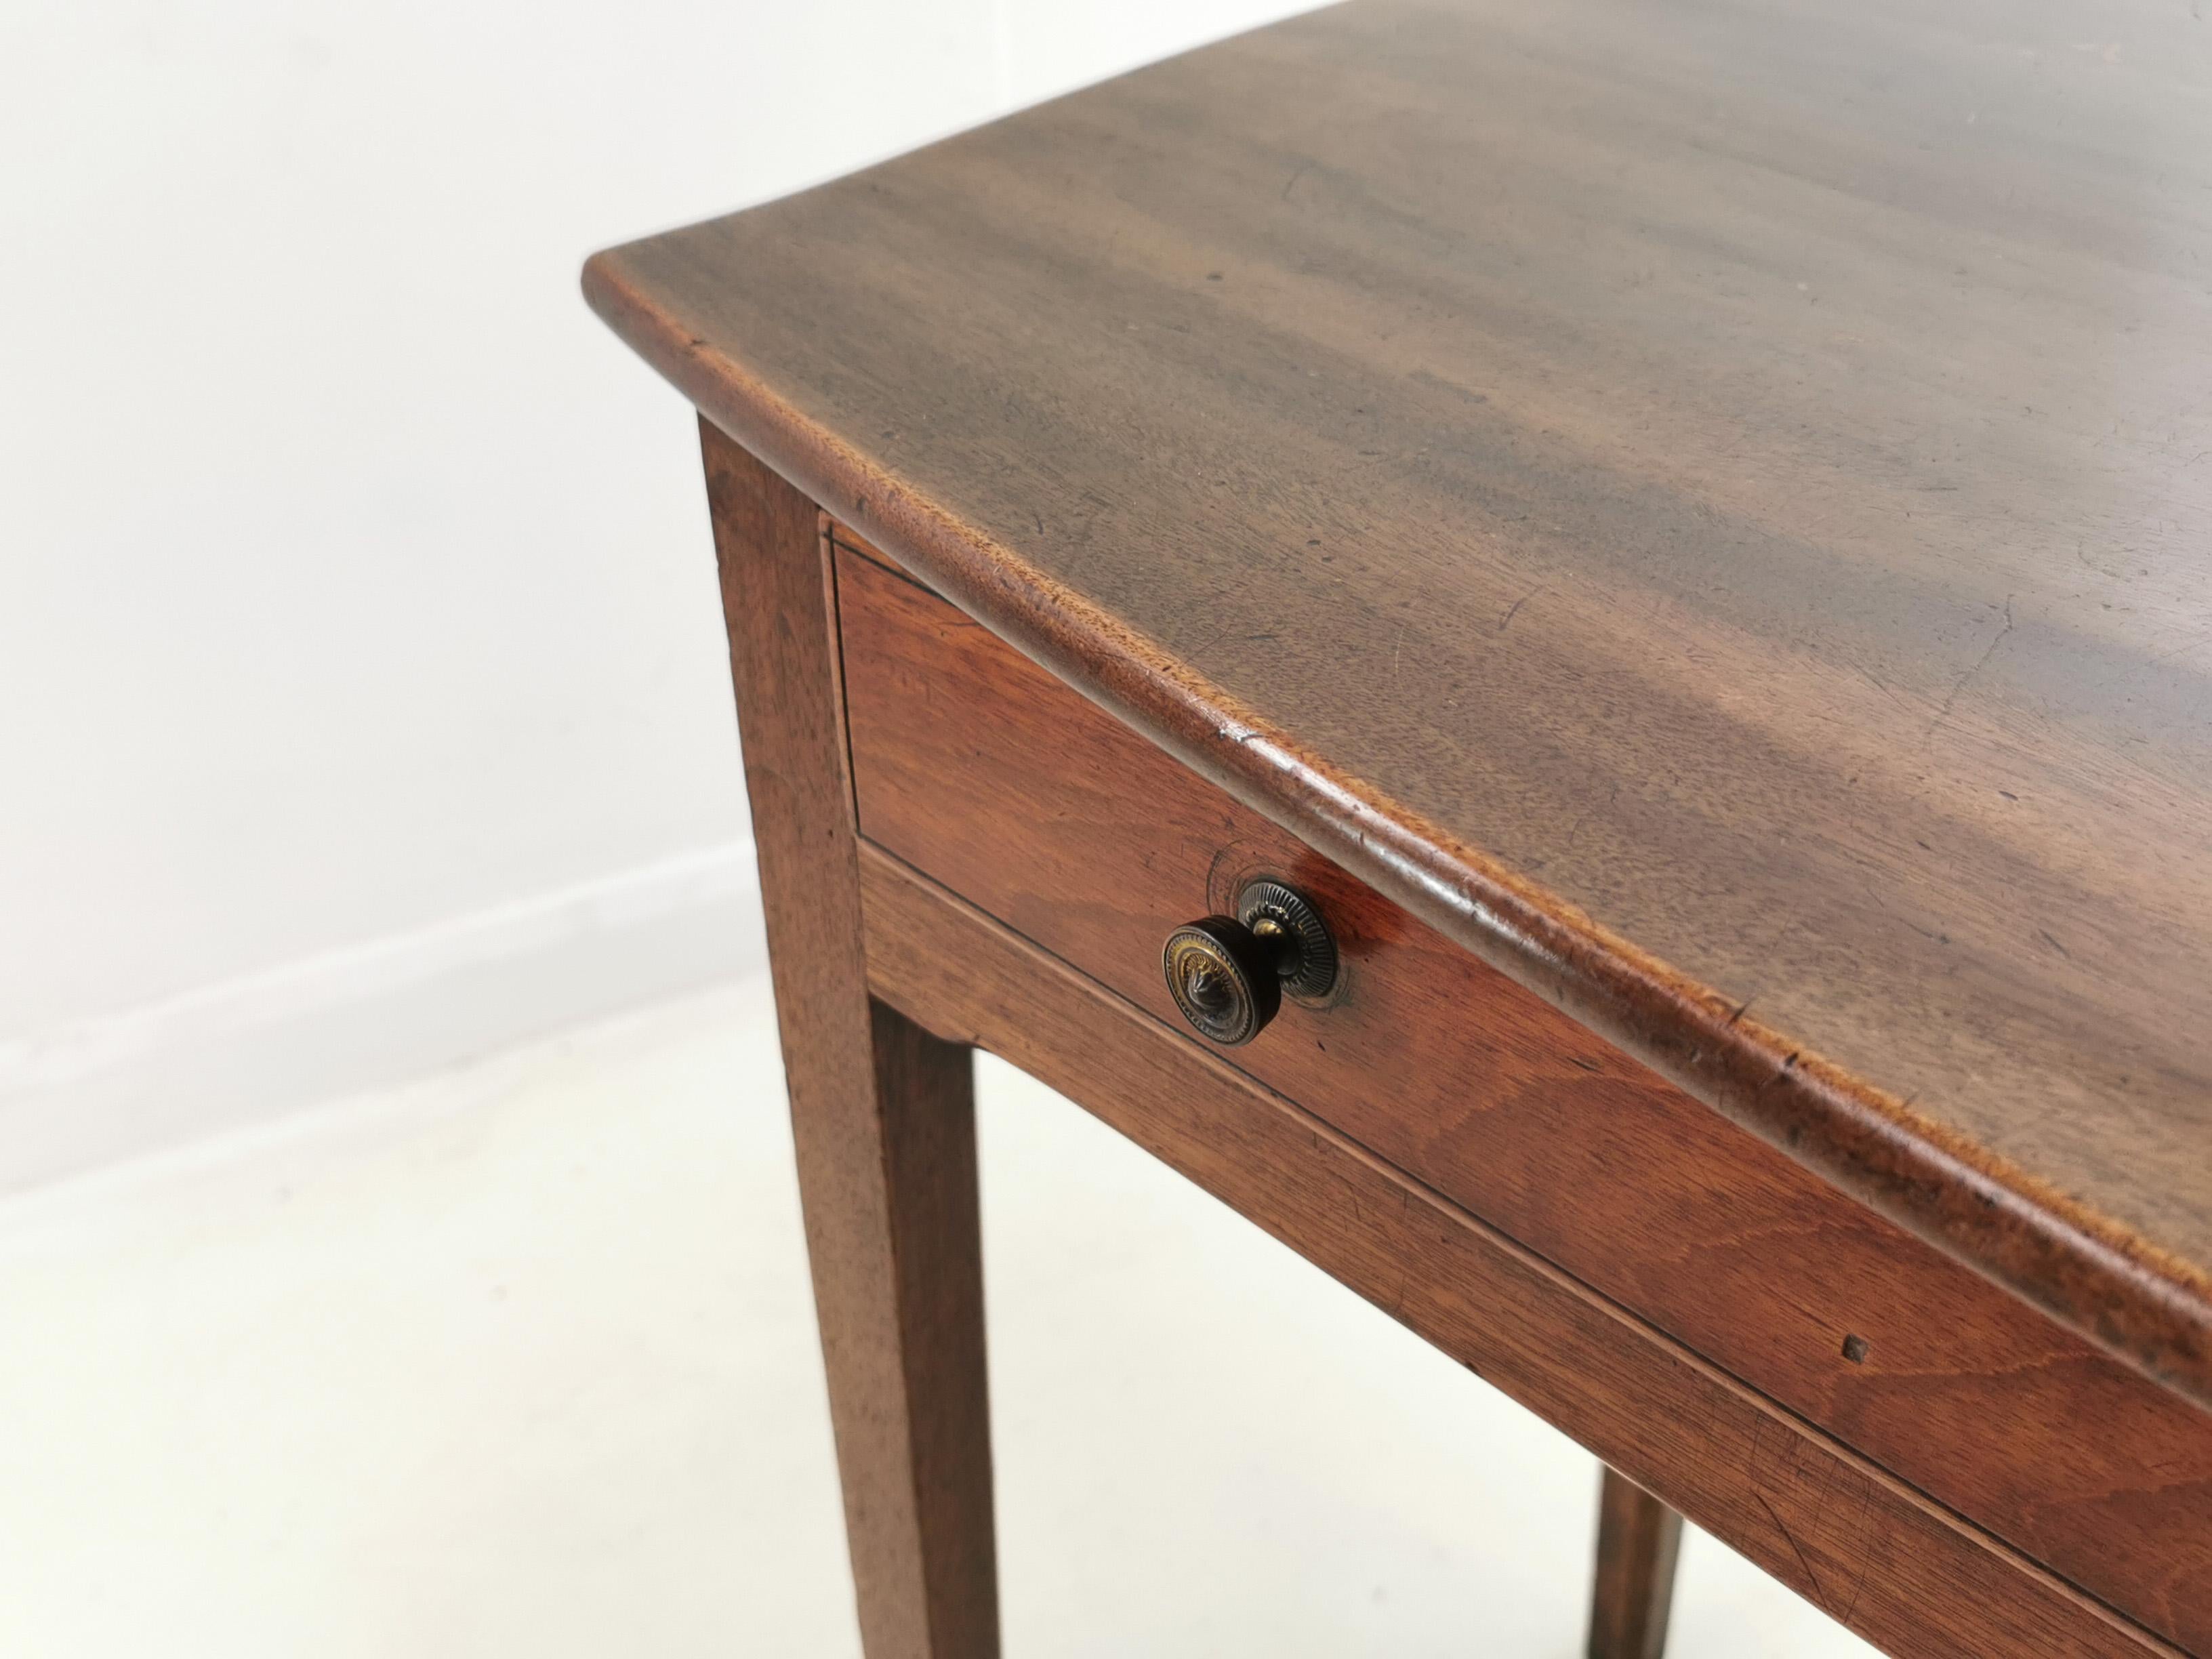 Georgian side table

Georgian mahogany side table or writing desk. Single drawer fitted with detailed brass knobs. Raised on square supports.

A very nice example of a simple Georgian design which we have decided not to renovate due to its